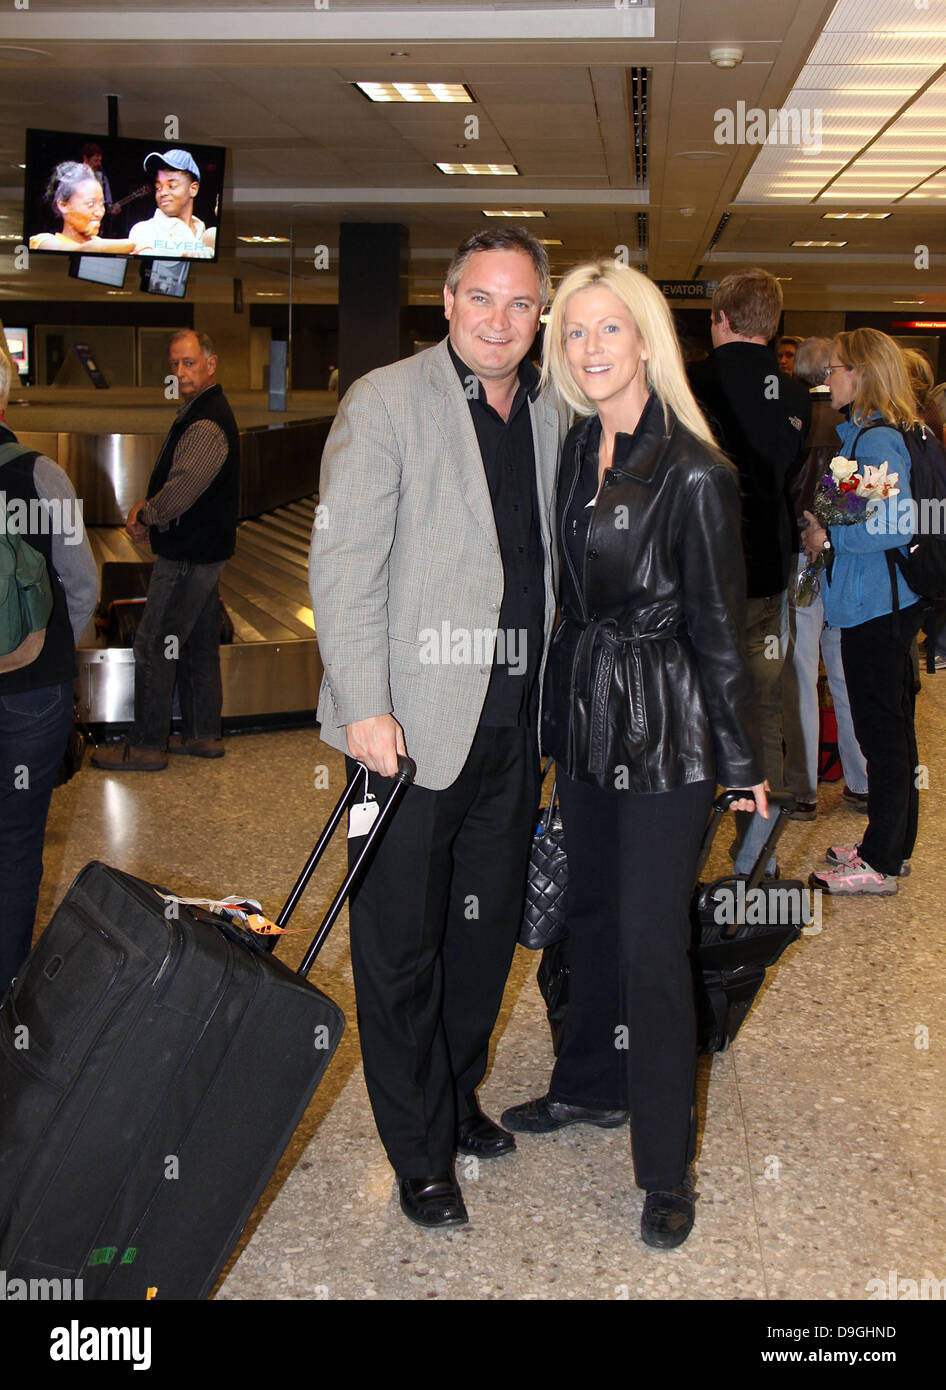 White House Party crashers Tareq Salahi and Michaele Salahi arrive at Washington Dulles Airport  after filming their episode of Celebrity Rehab which Michaeli Salahi has been kicked off the show. Washington DC, USA - 16.03.11 Stock Photo